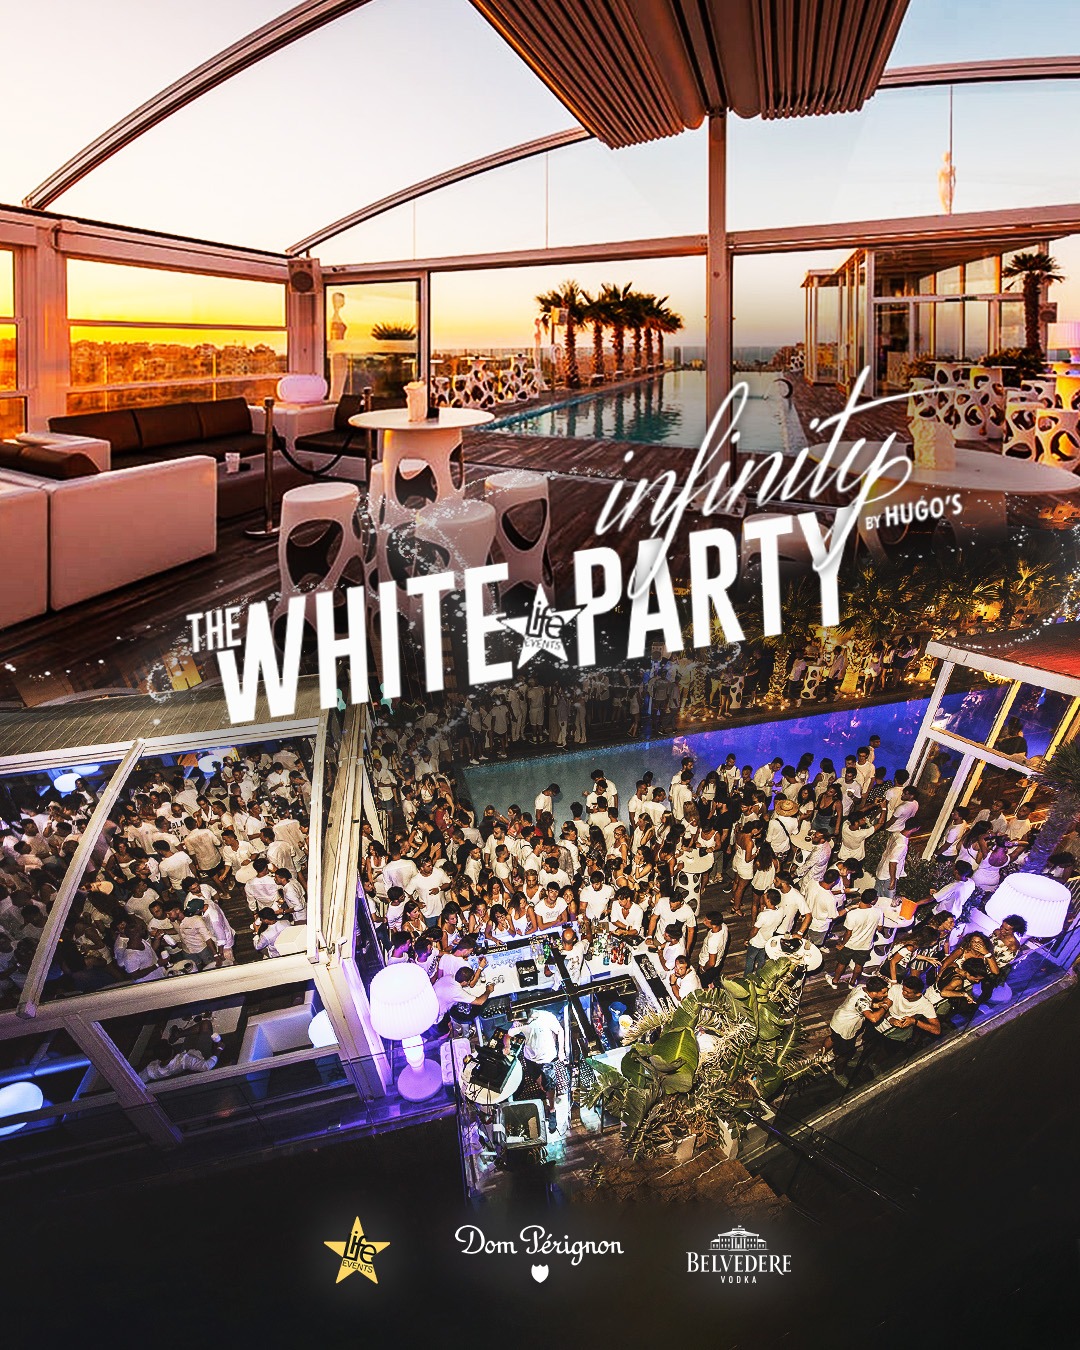 The White Party Infinity by Hugo's poster